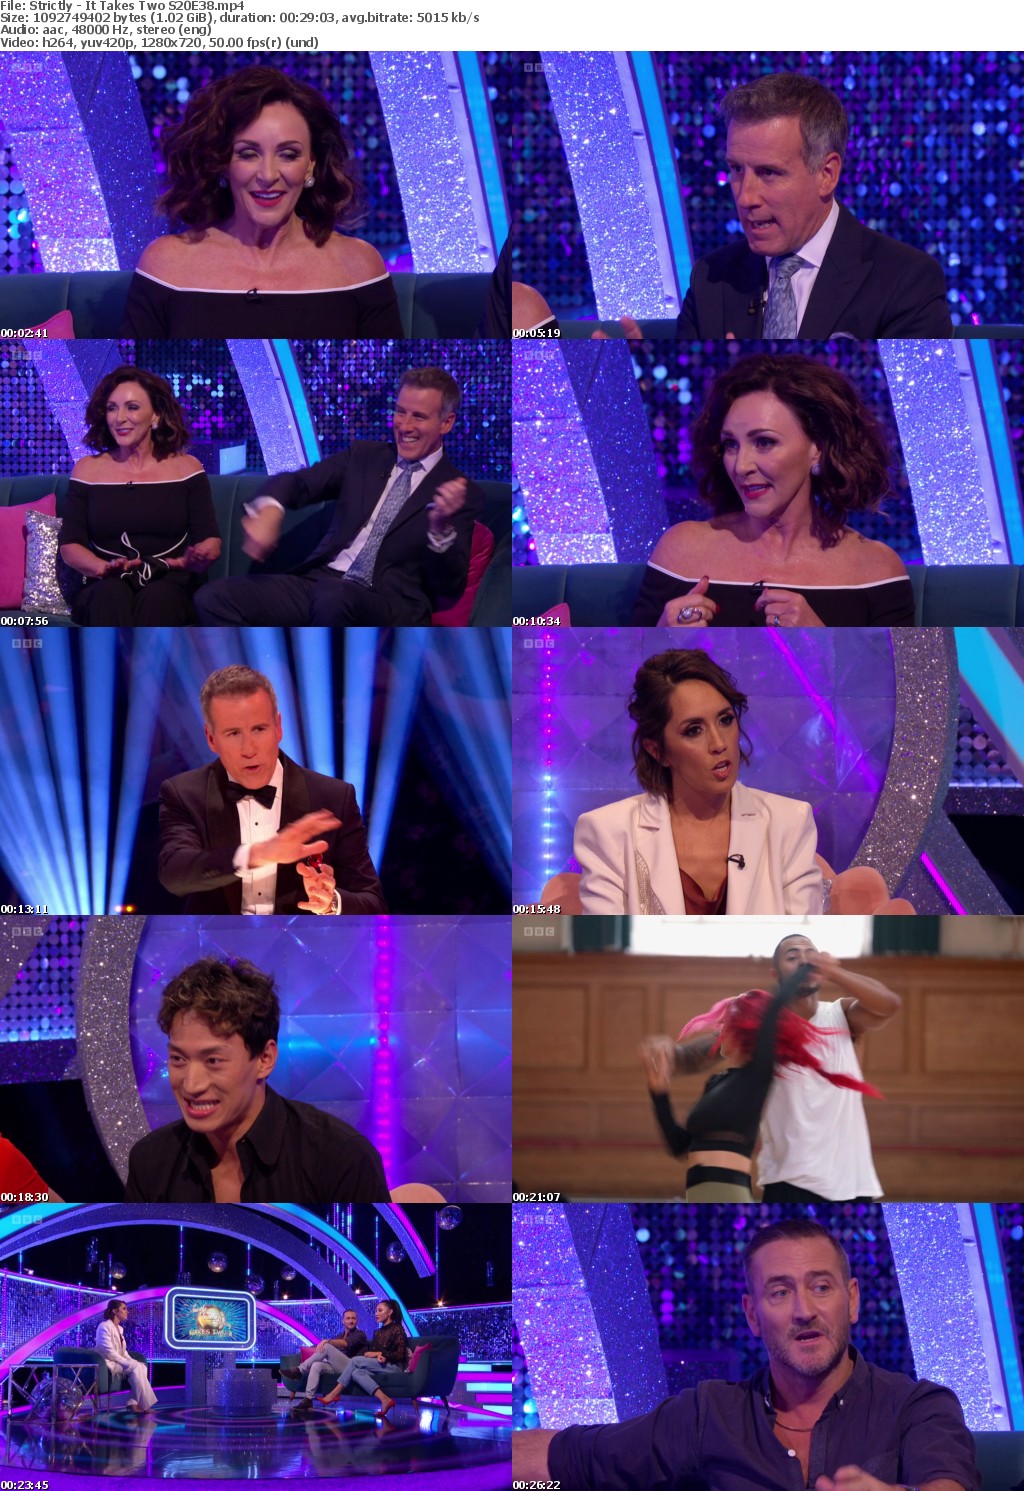 Strictly - It Takes Two S20E38 (1280x720p HD, 50fps, soft Eng subs)